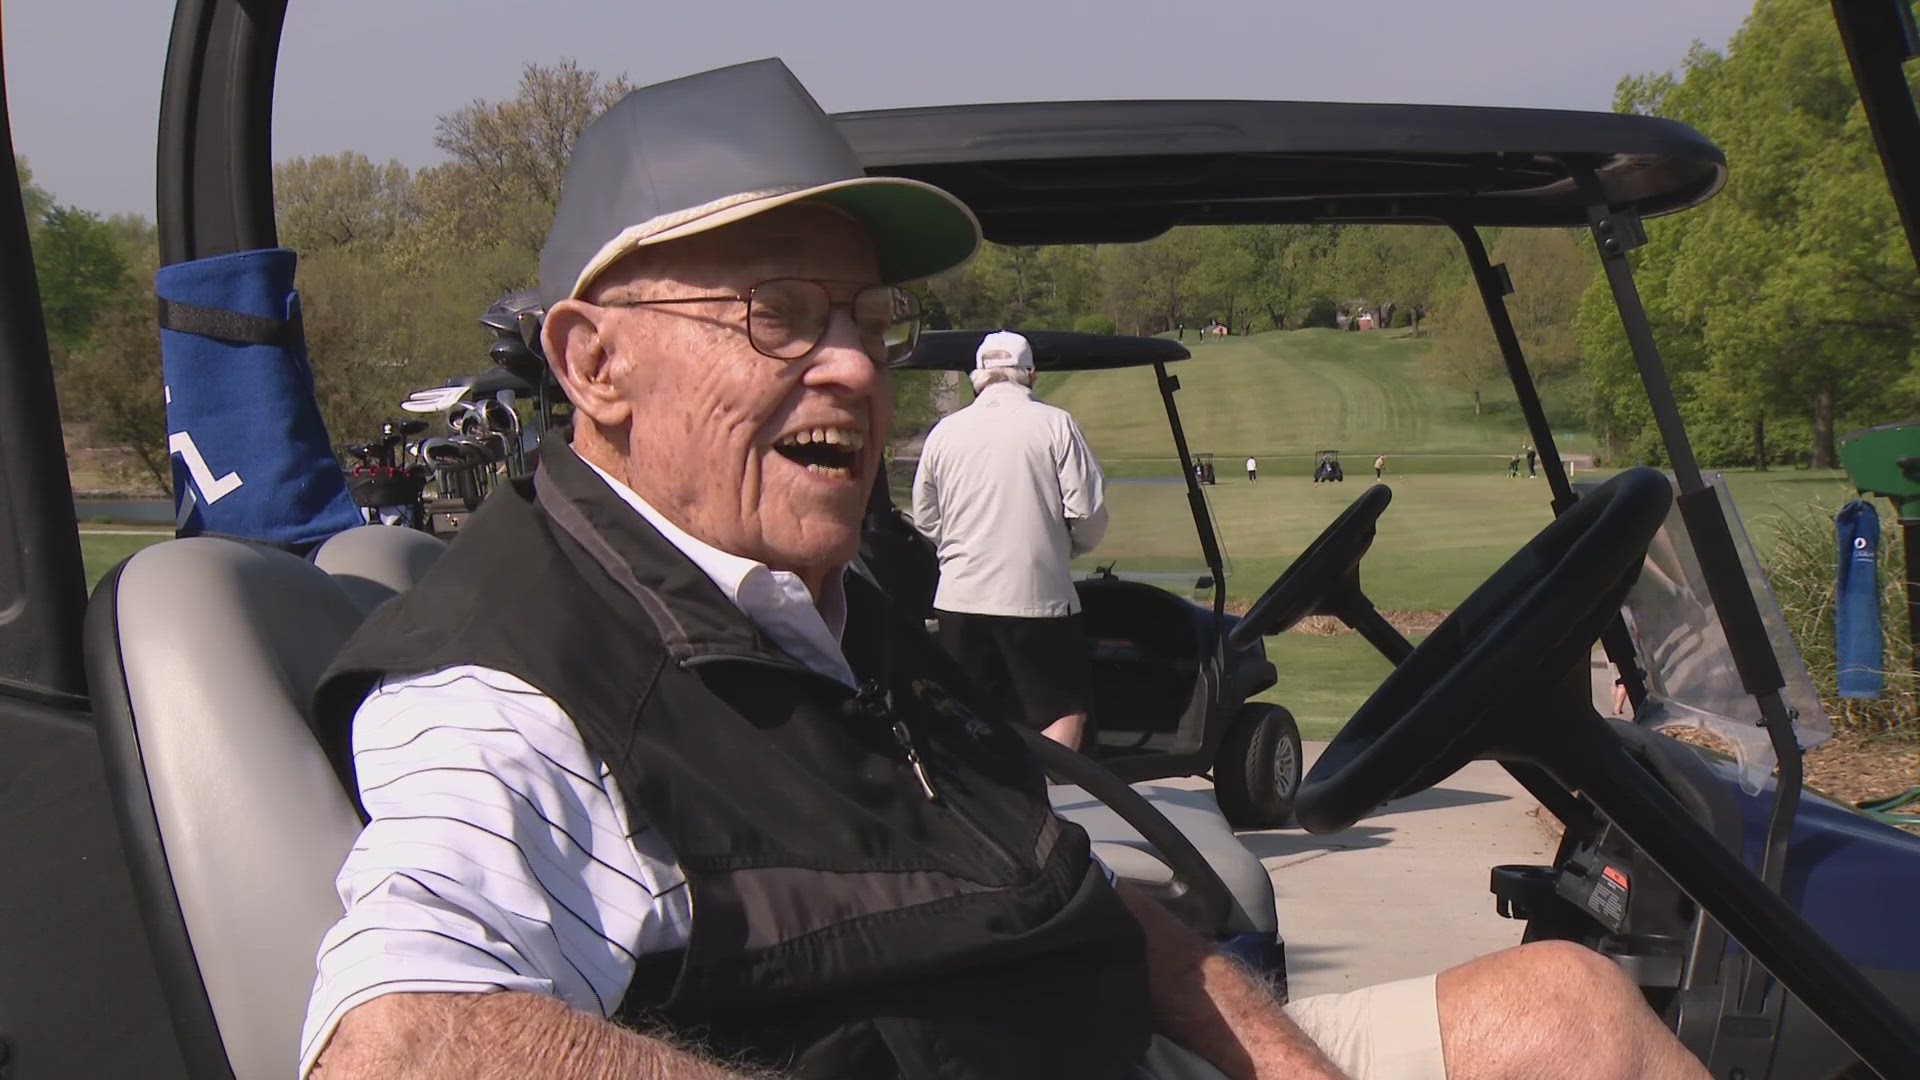 One of the best things about the game of golf is that you can play it your whole life. 103-year-old Larry DiCampo is living proof.